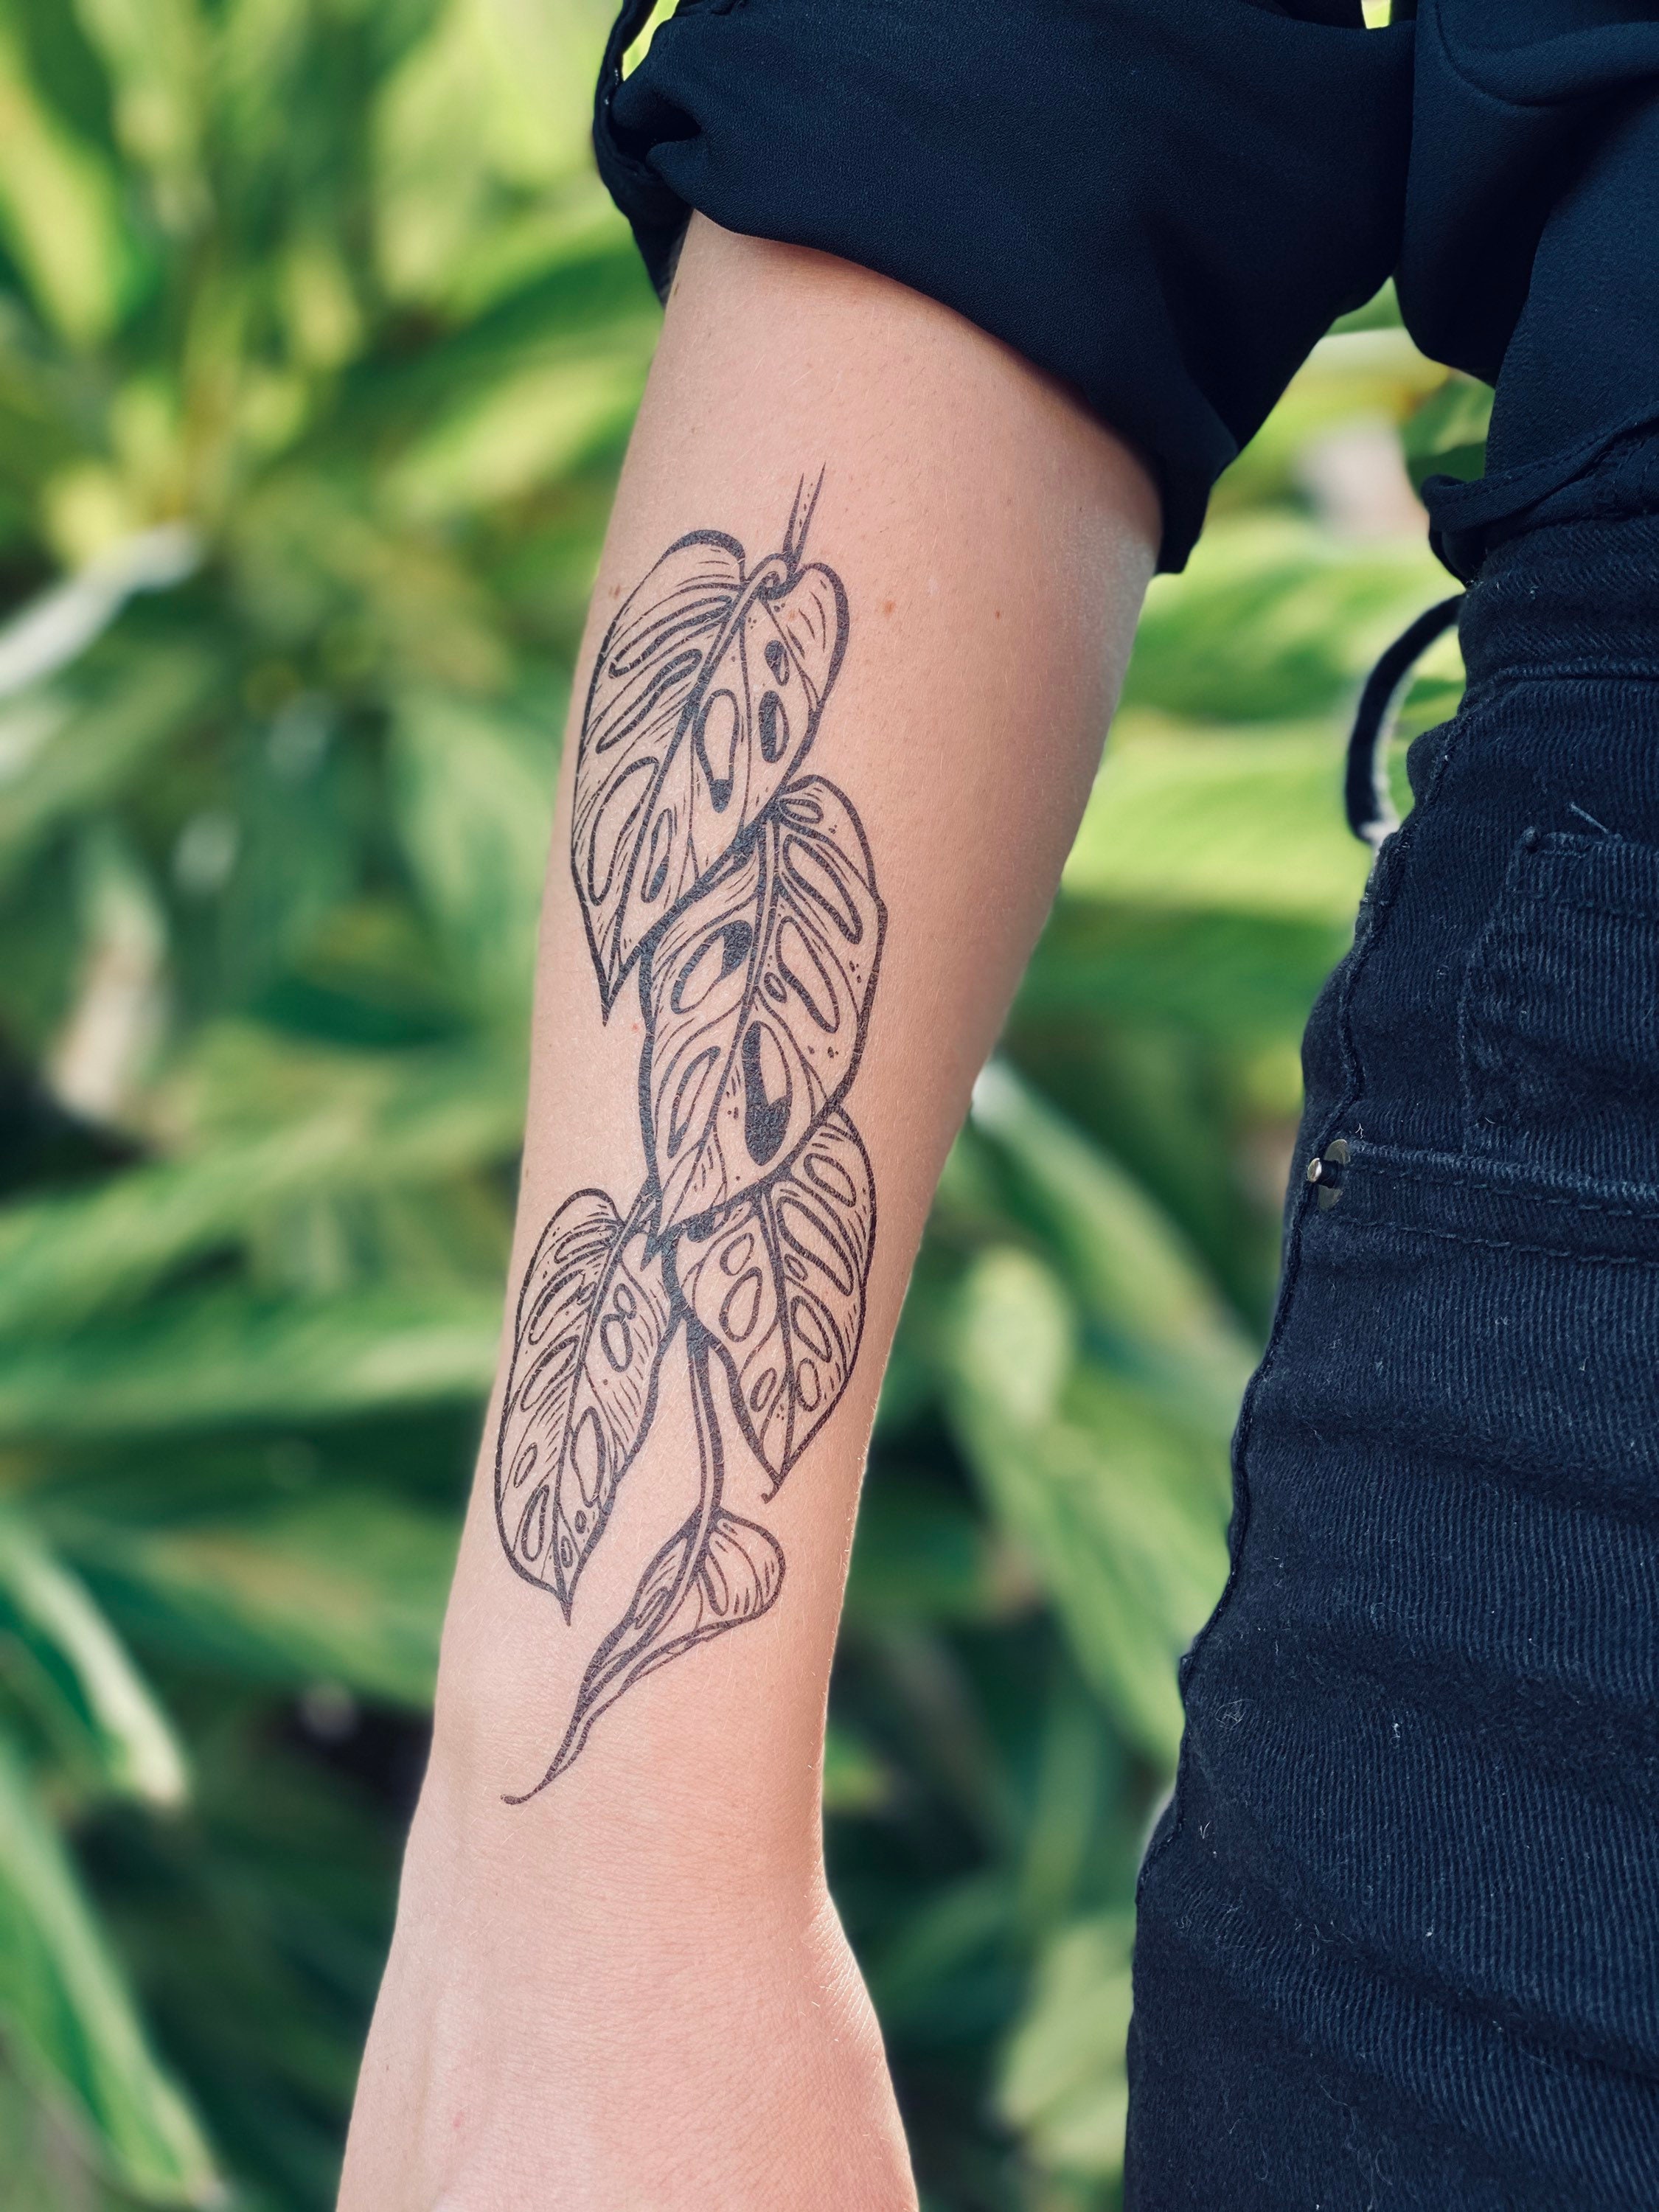 21 Stunning Tattoos Thatll Make You Want To Run Out And Get Inked Today